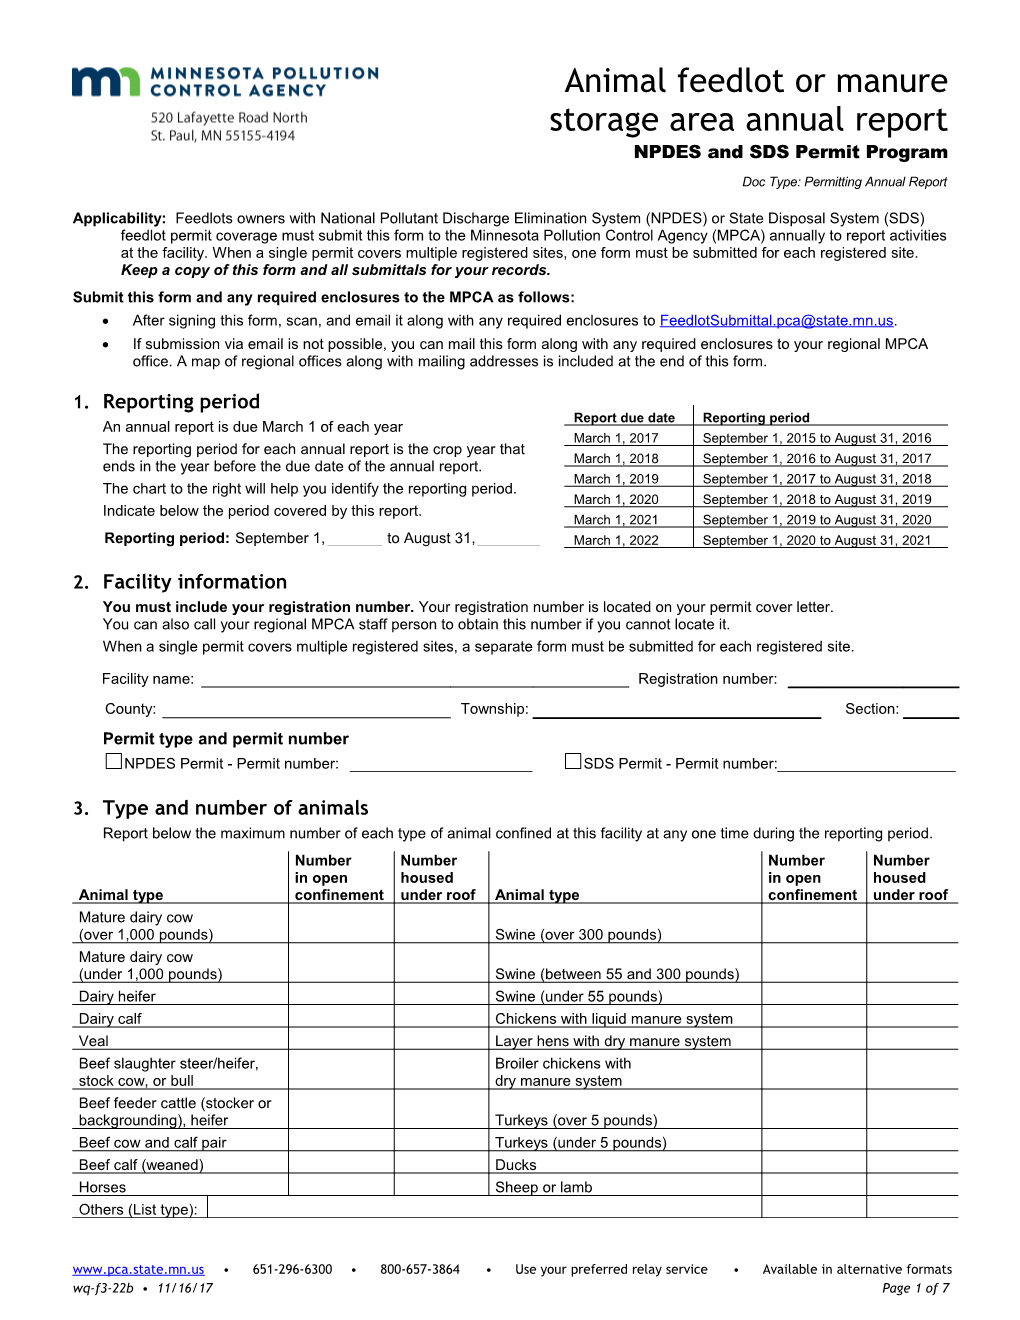 Animal Feedlot Or Manure Storage Area Annual Report - NPDES/SDS Permit Program - Form